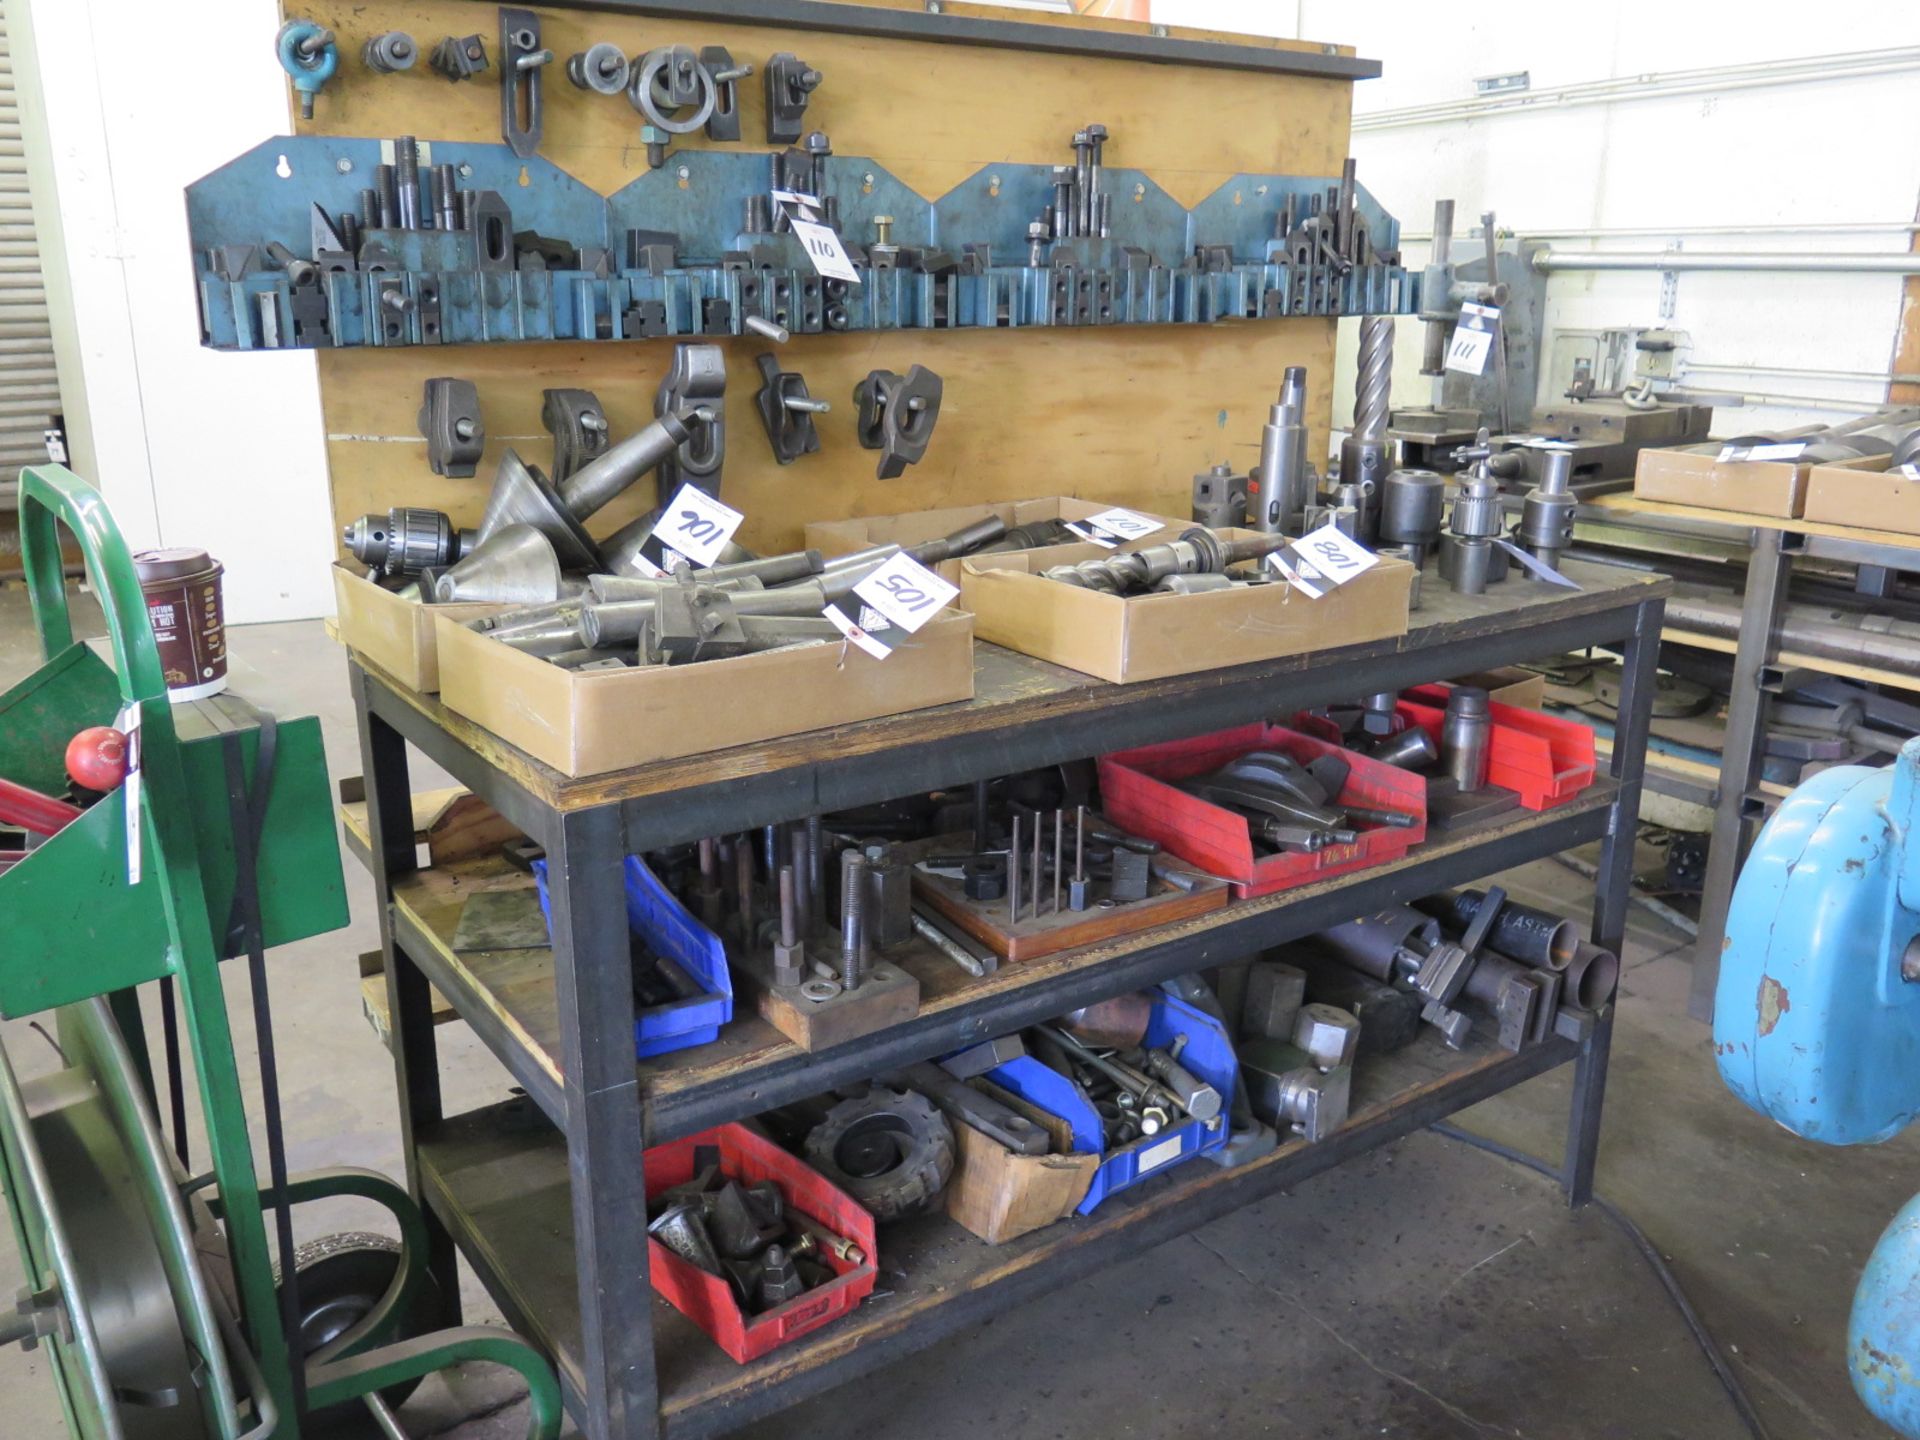 Mill Clamp Sets, Work Bench and Misc